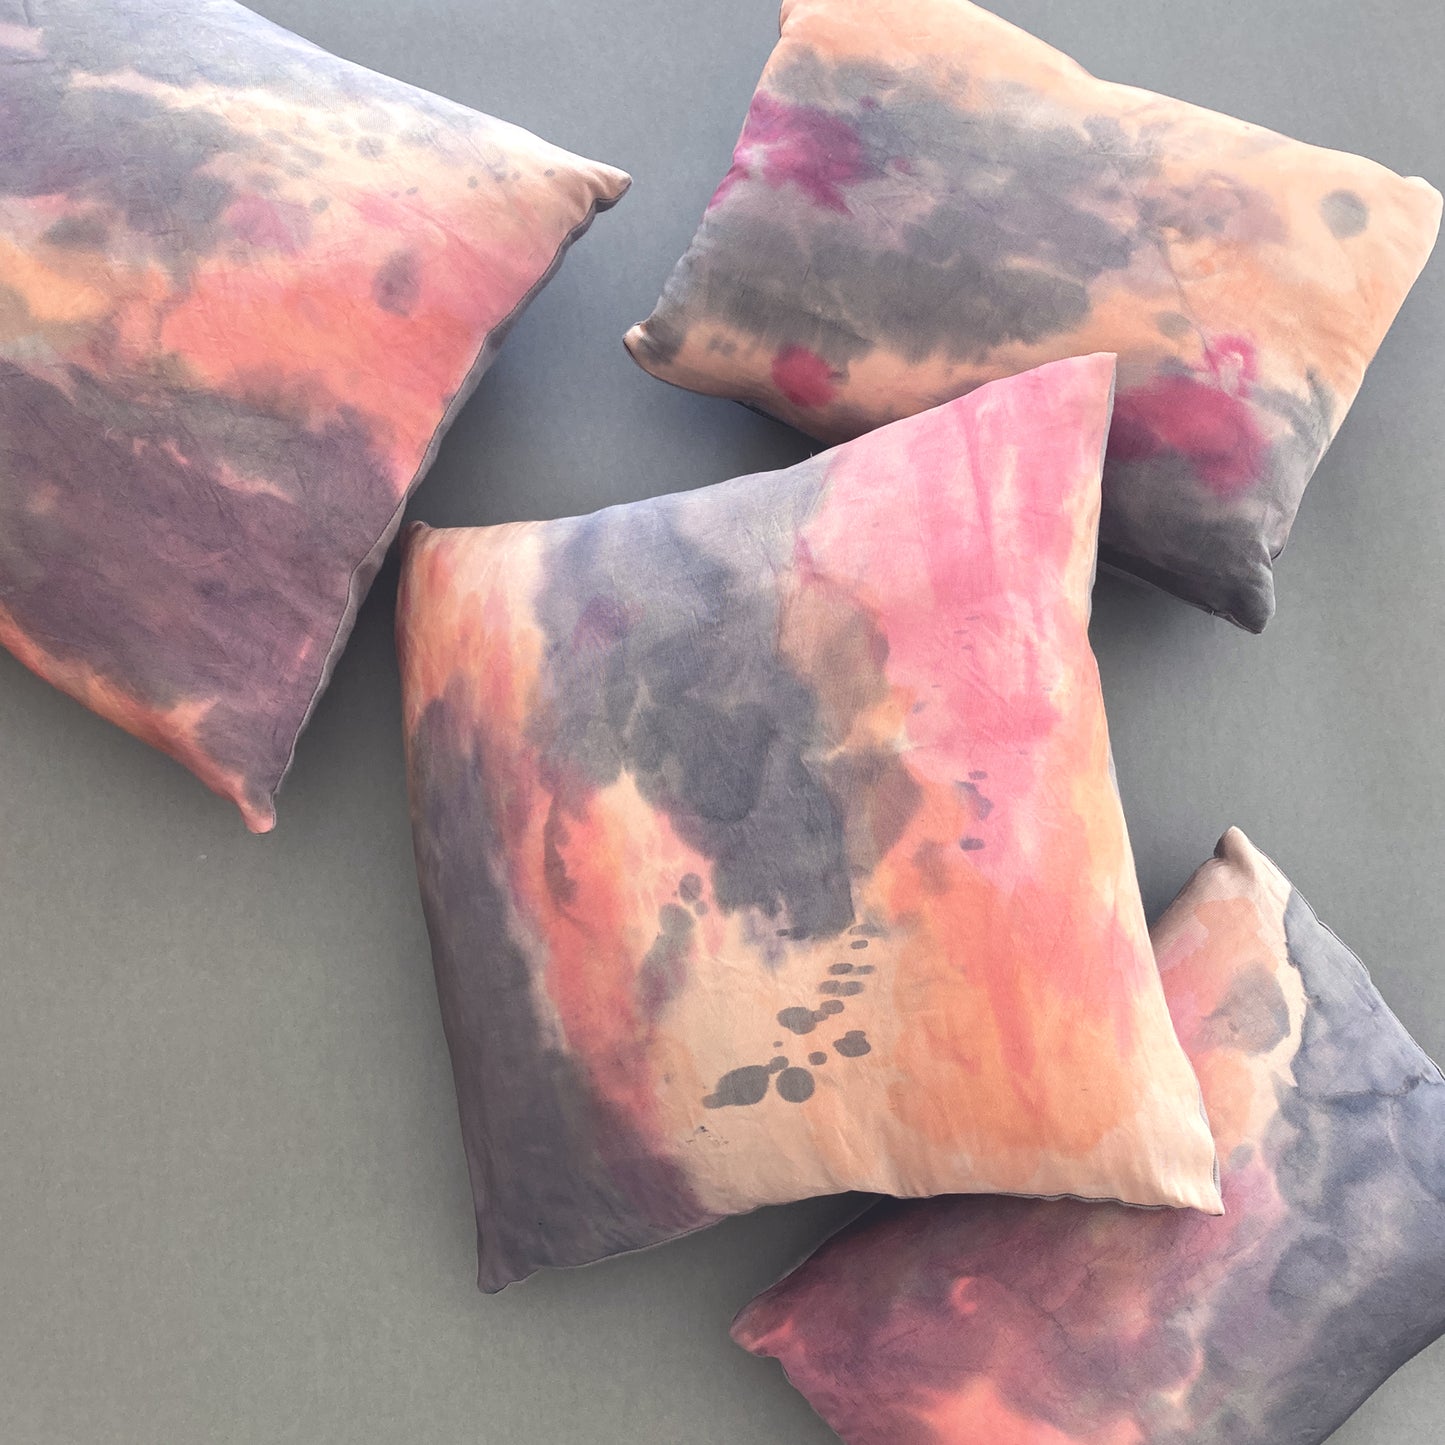 Hand Painted Silk Pillow, Abstract No.7, Peach Pink & Navy